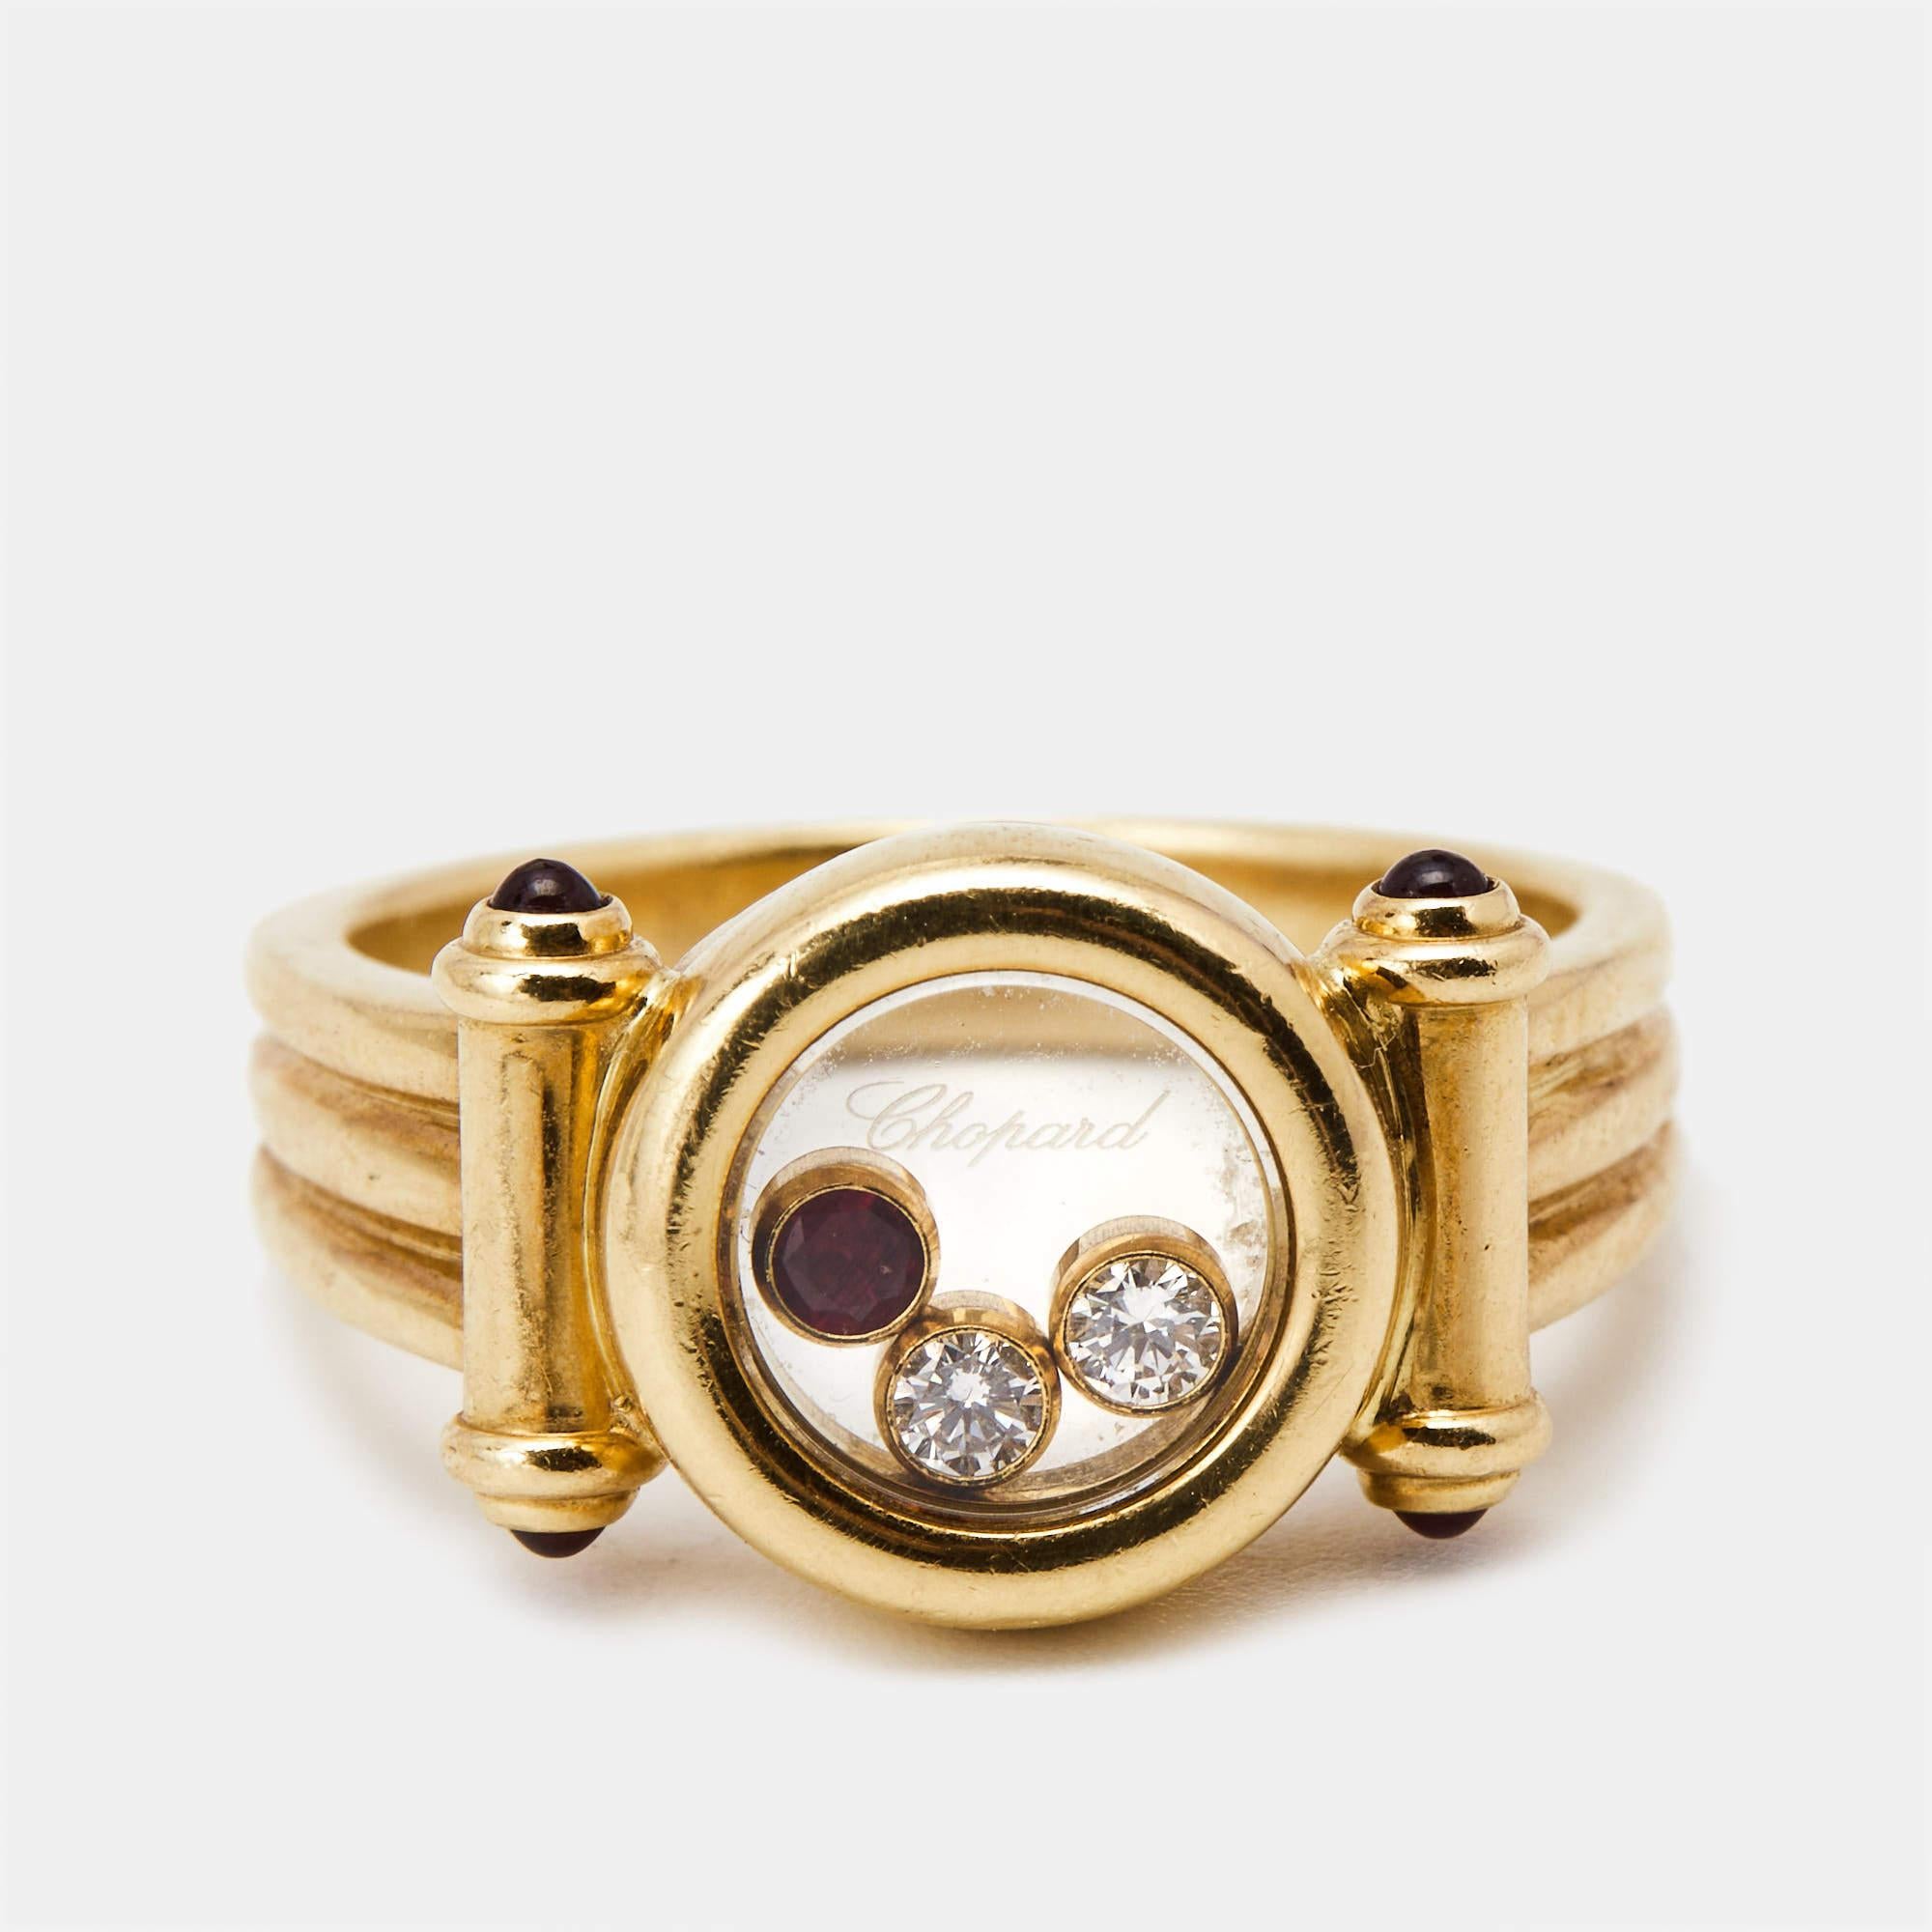 One of the most iconic and loved designs from the house of Chopard, this stunning ring is an icon of style and luxury. Constructed in 18k yellow gold, this ring is sure to become your everyday essential.

